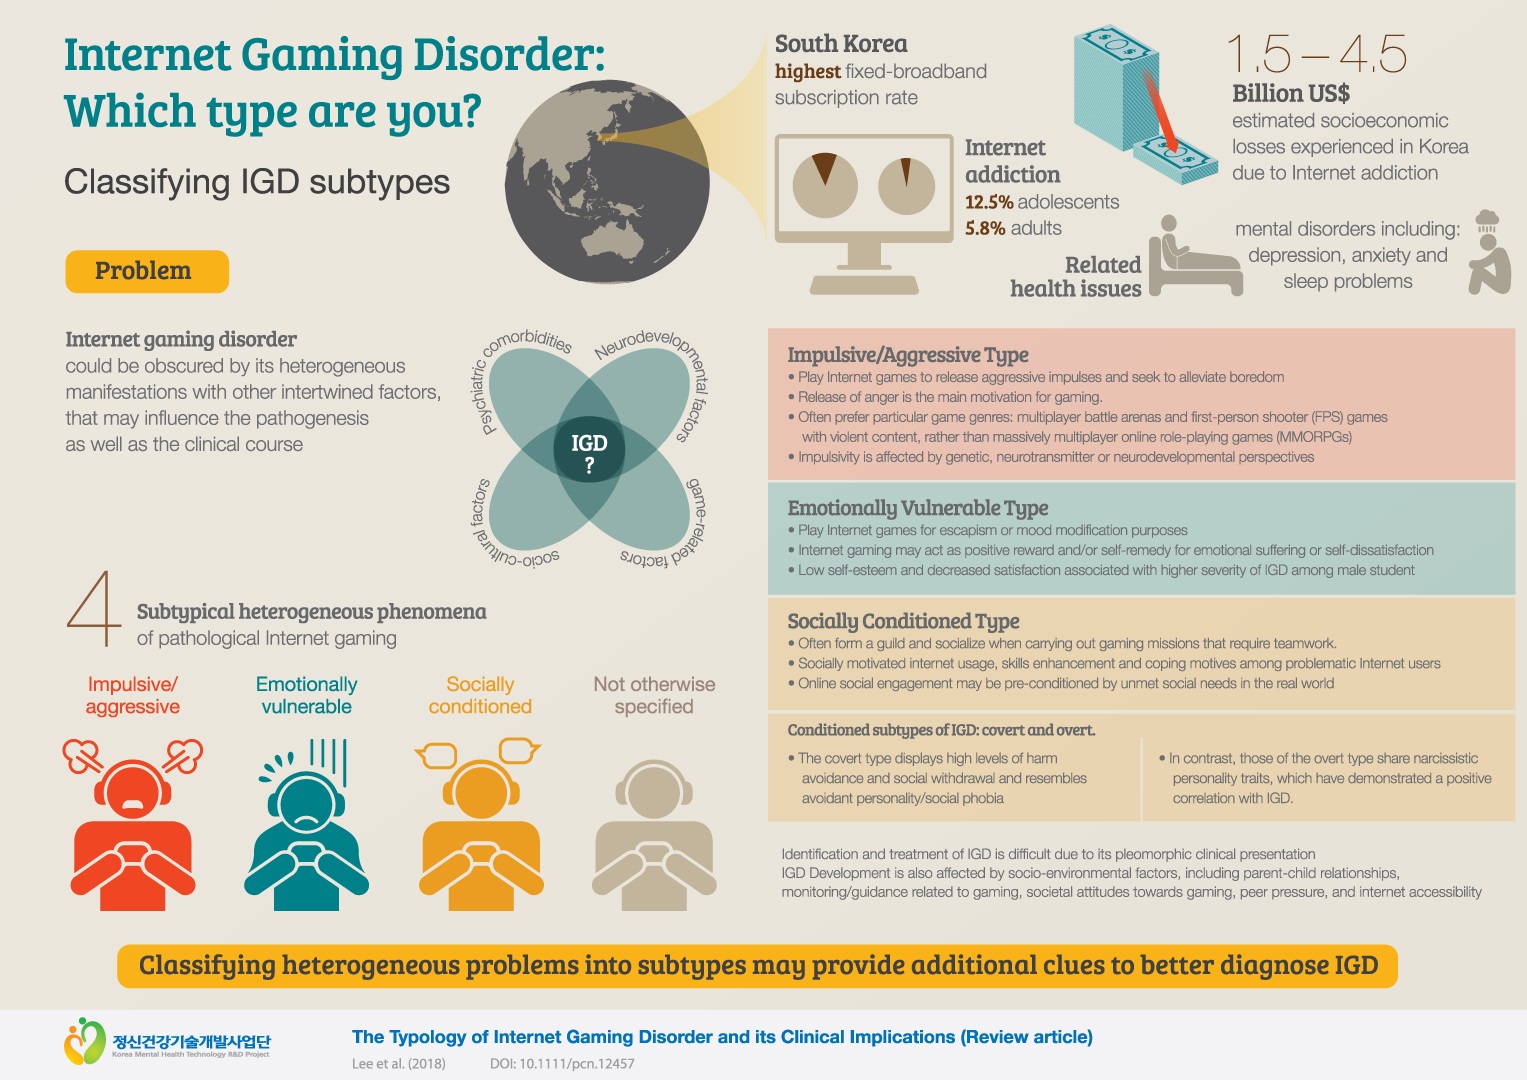 6. Internet Gaming Disorder: Which type are you?